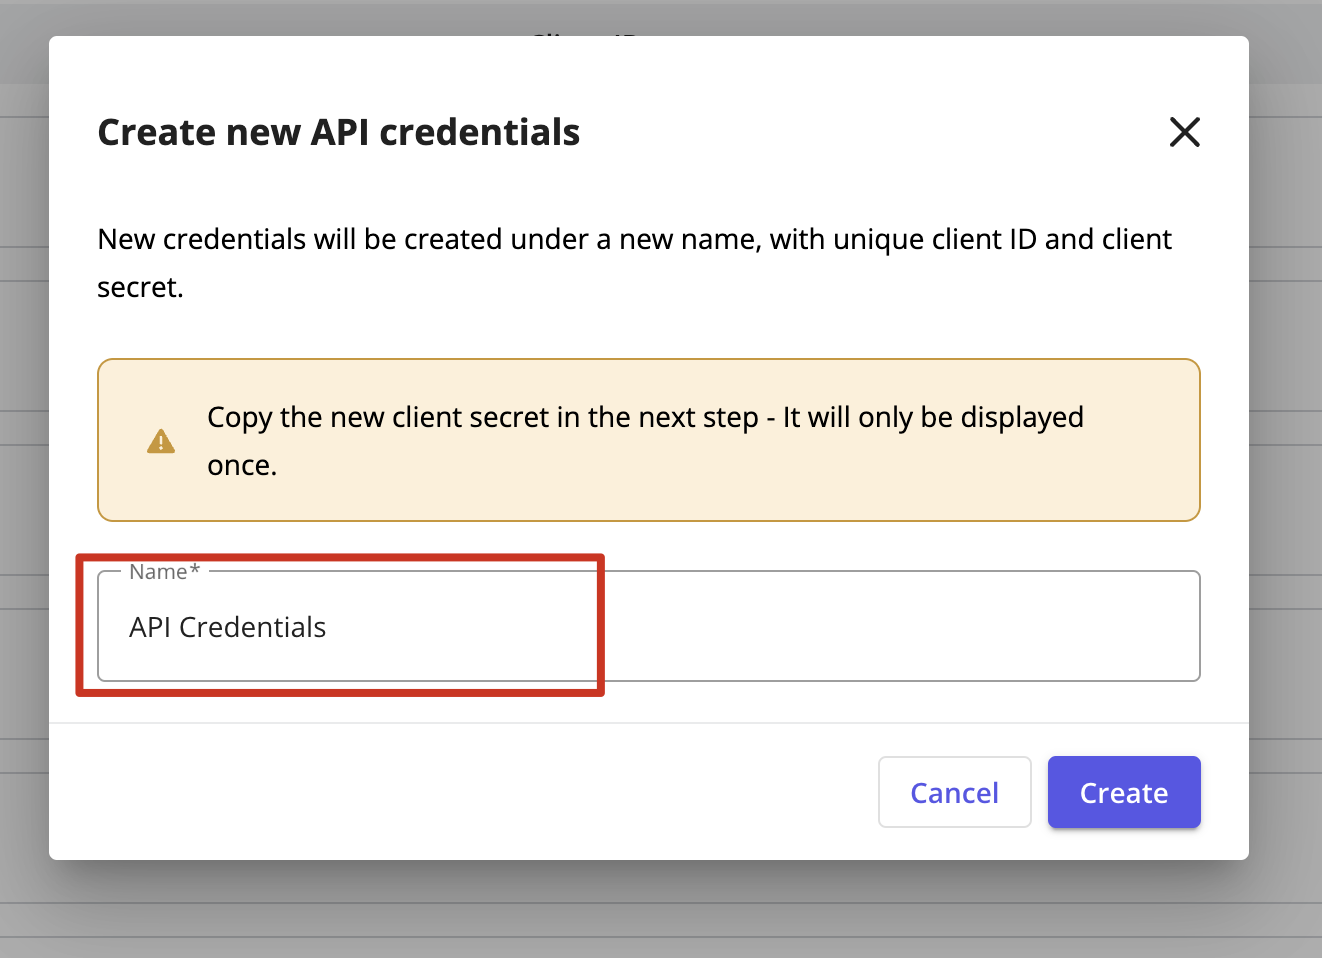 You can set any name for your API Credentials